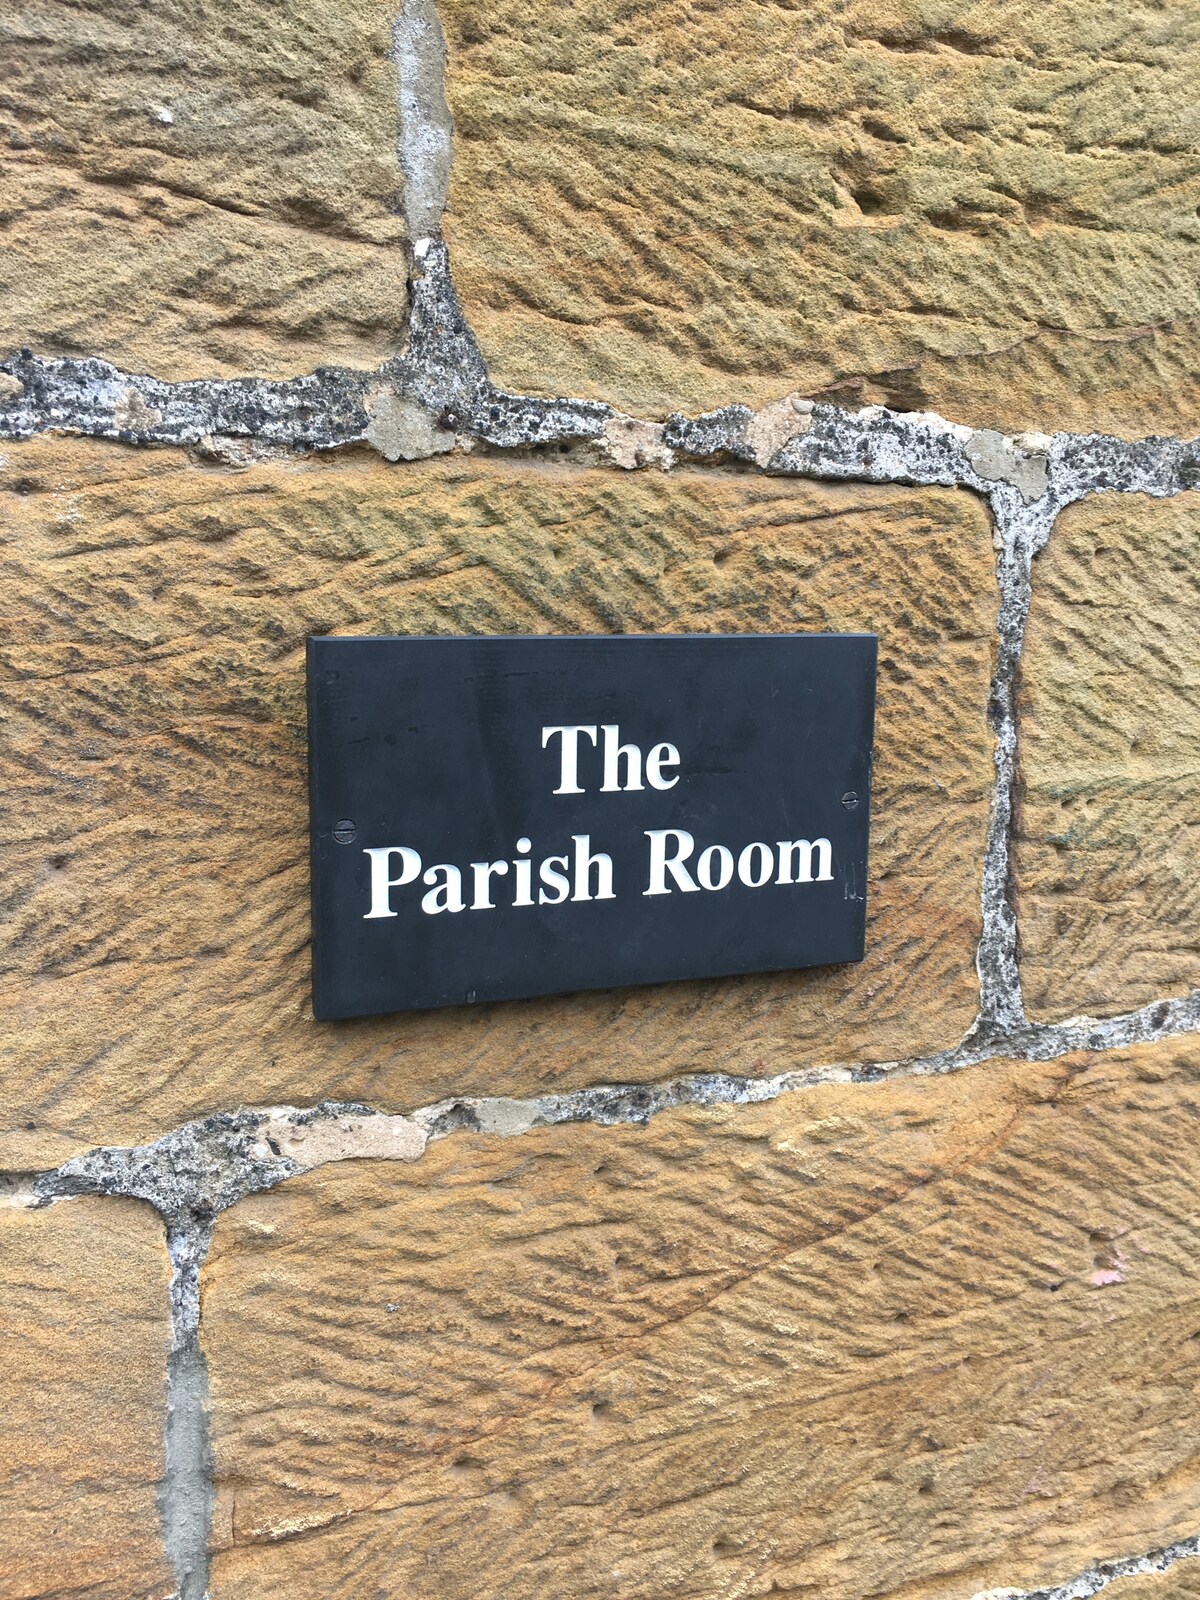 The Parish Room at The Old Rectory